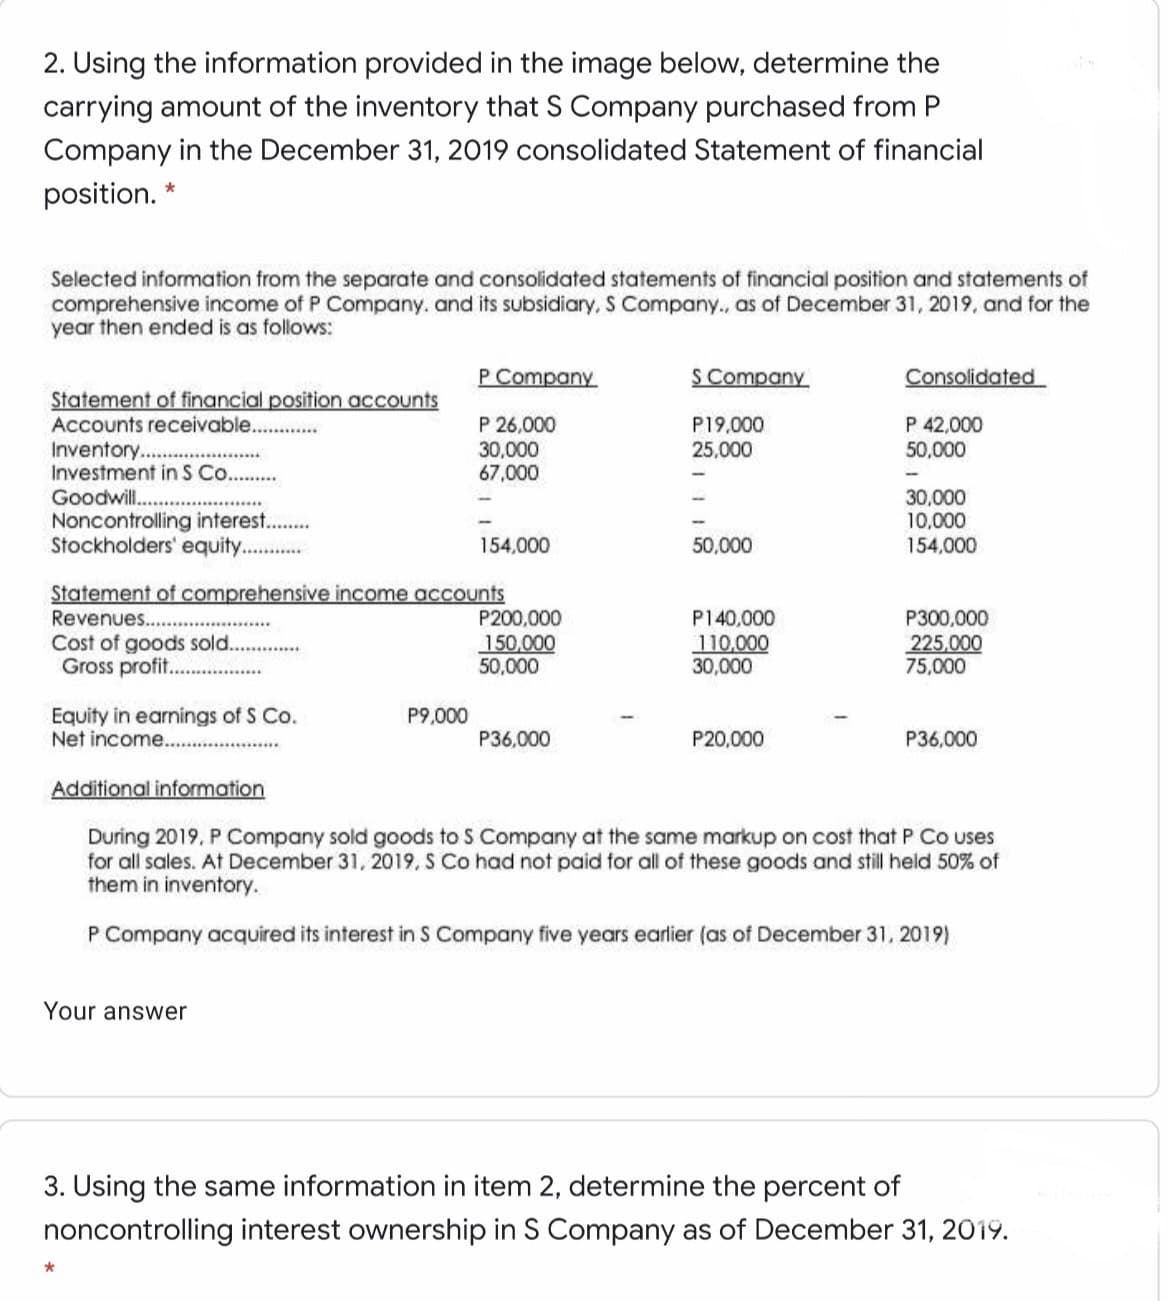 2. Using the information provided in the image below, determine the
carrying amount of the inventory that S Company purchased from P
Company in the December 31, 2019 consolidated Statement of financial
position. *
Selected information from the separate and consolidated statements of financial position and statements of
comprehensive income of P Company. and its subsidiary, S Company., as of December 31, 2019, and for the
year then ended is as follows:
P Company
S Company
Consolidated
Statement of financial position accounts
Accounts receivable. .
Inventory....
Investment in S Co..
Goodwill.
Noncontrolling interest...
Stockholders' equity...
P 26,000
30,000
67,000
P19,000
25,000
P 42,000
50,000
30,000
10,000
154,000
154,000
50,000
Statement of comprehensive income accounts
P200,000
150,000
50,000
P140,000
110,000
30,000
P300,000
225,000
75,000
Revenues..
Cost of goods sold..
Gross profit.
Equity in earnings of S Co.
Net income...
P9,000
P36,000
P20,000
P36,000
Additional information
During 2019, P Company sold goods to S Company at the same markup on cost that P Co uses
for all sales. At December 31, 2019, S Co had not paid for all of these goods and still held 50% of
them in inventory.
P Company acquired its interest in S Company five years earlier (as of December 31, 2019)
Your answer
3. Using the same information in item 2, determine the percent of
noncontrolling interest ownership in S Company as of December 31, 2019.
